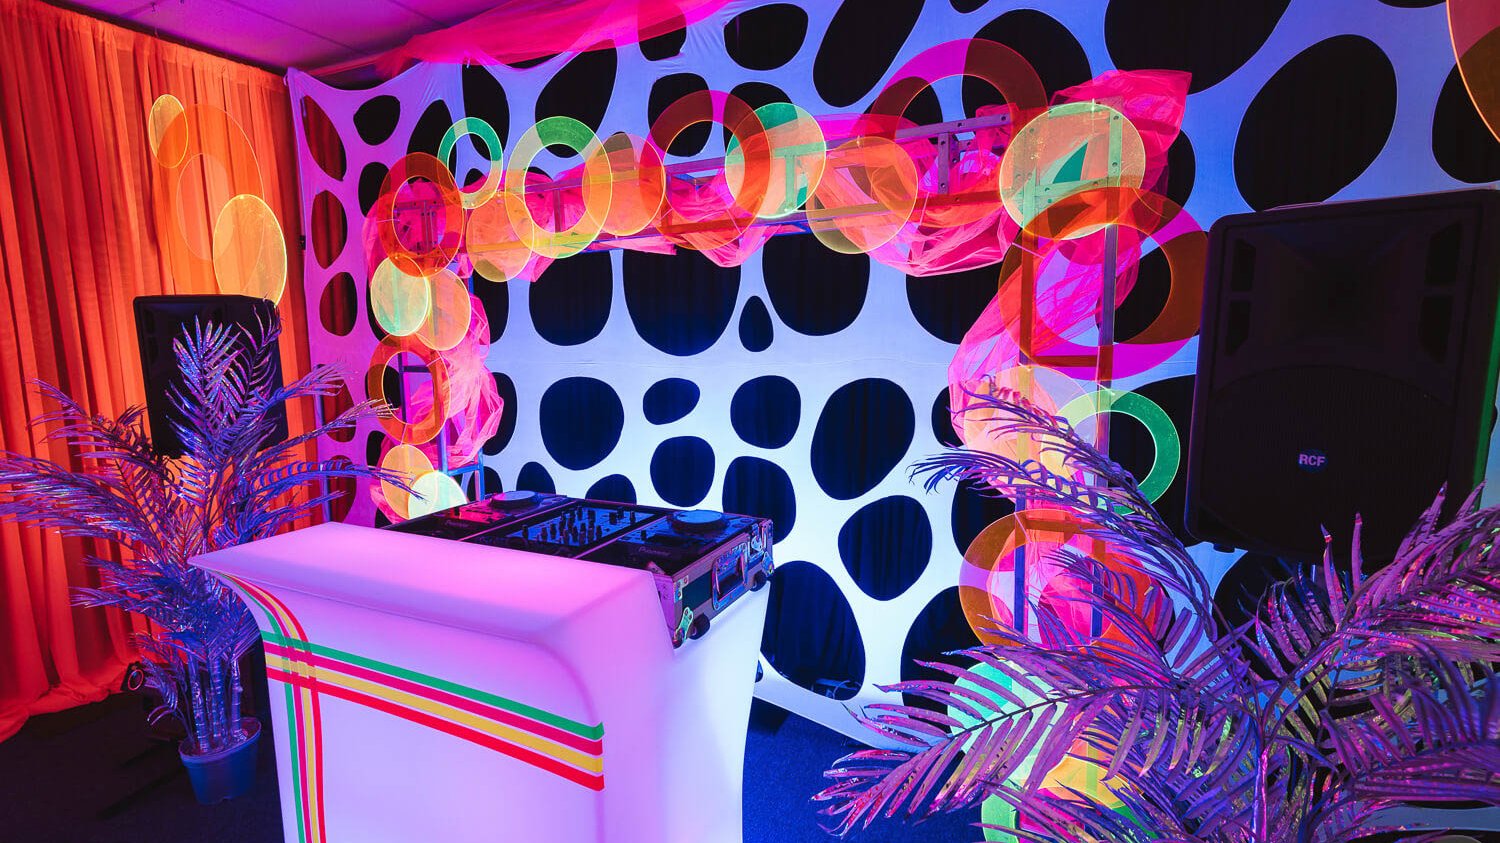 DJ booth at neon themed event